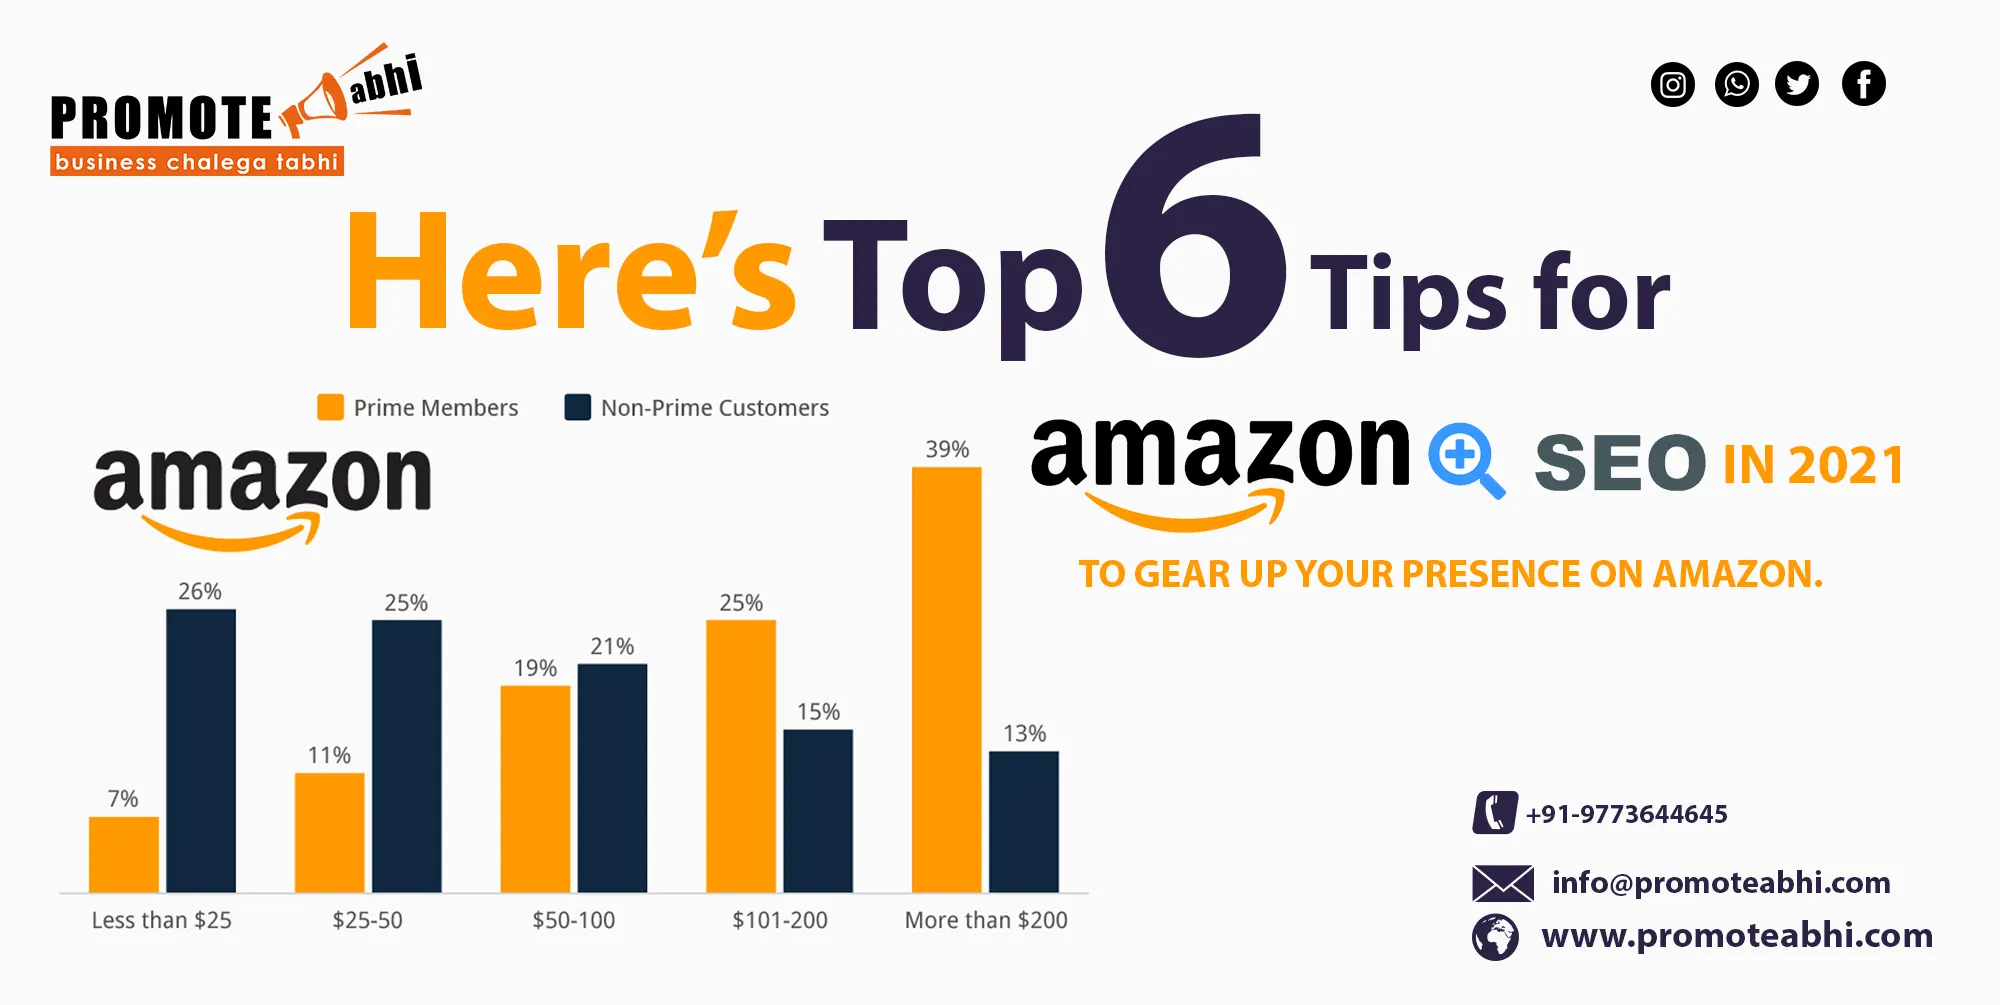 6 Tips for Amazon SEO in 2021